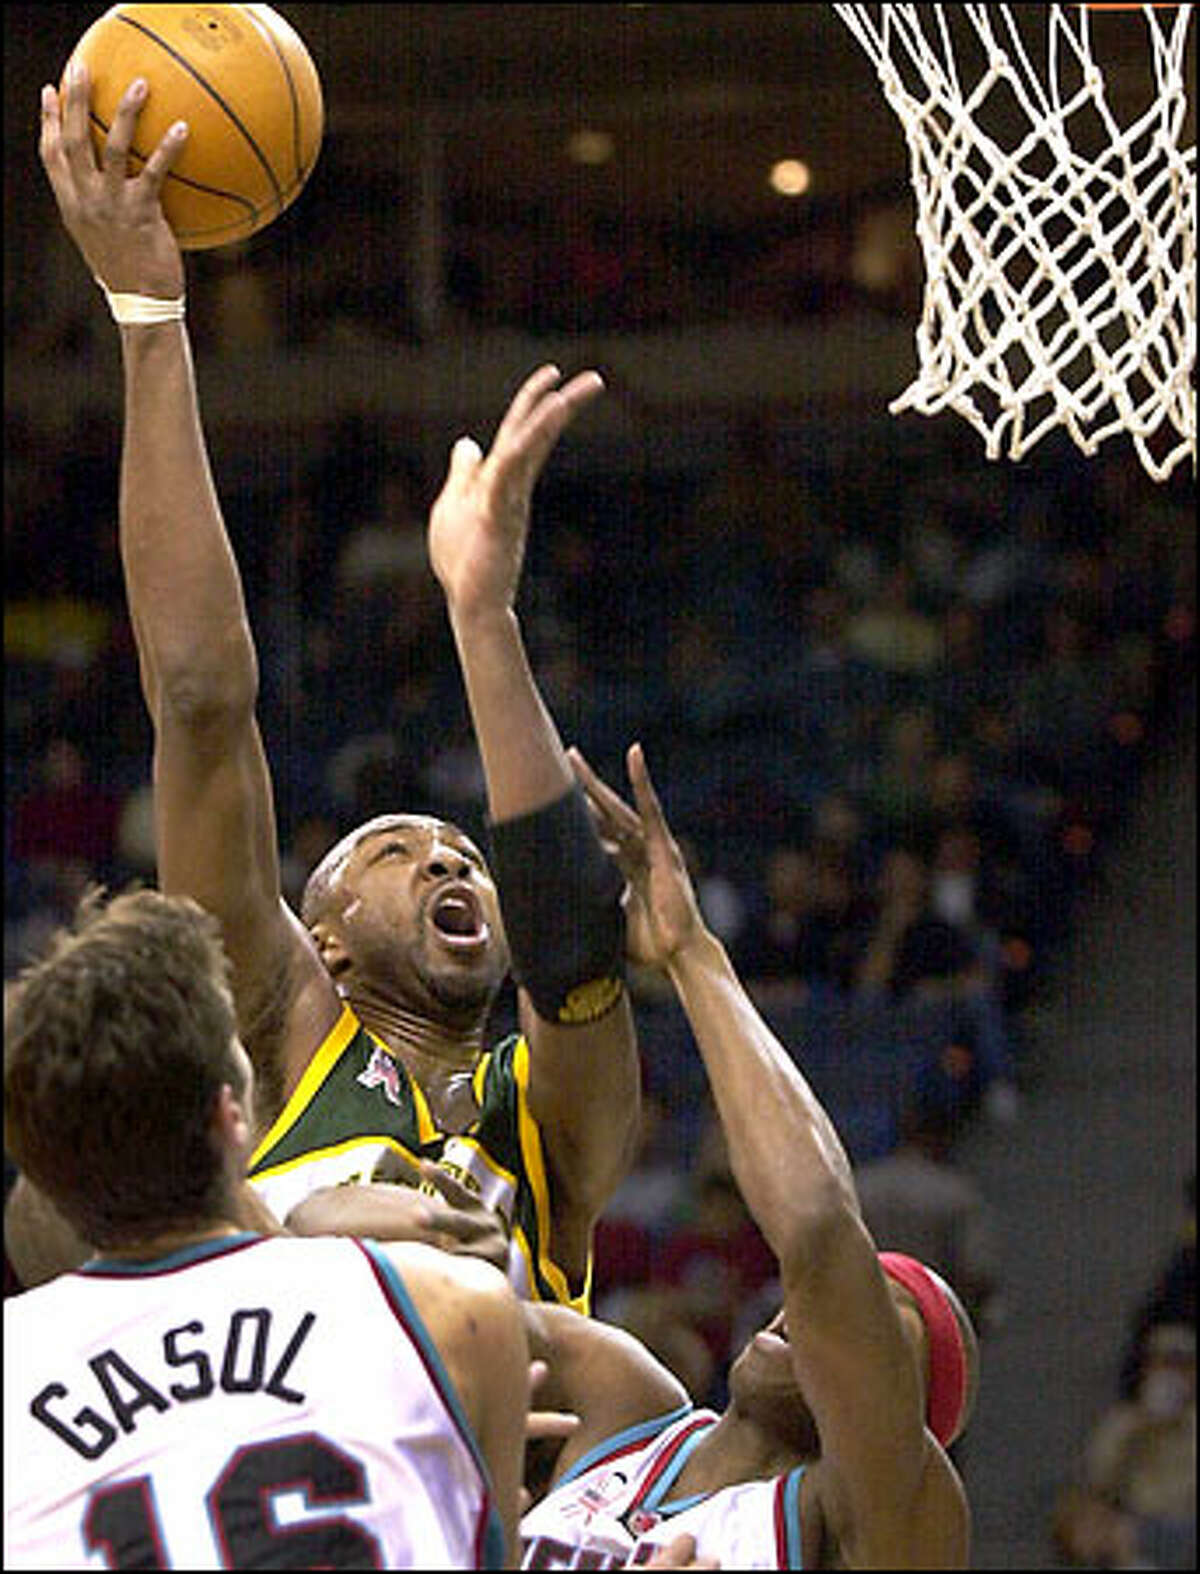 Vin Baker, who had six points and three rebounds, goes up for a shot as Memphis' Pau Gasol looks for help.